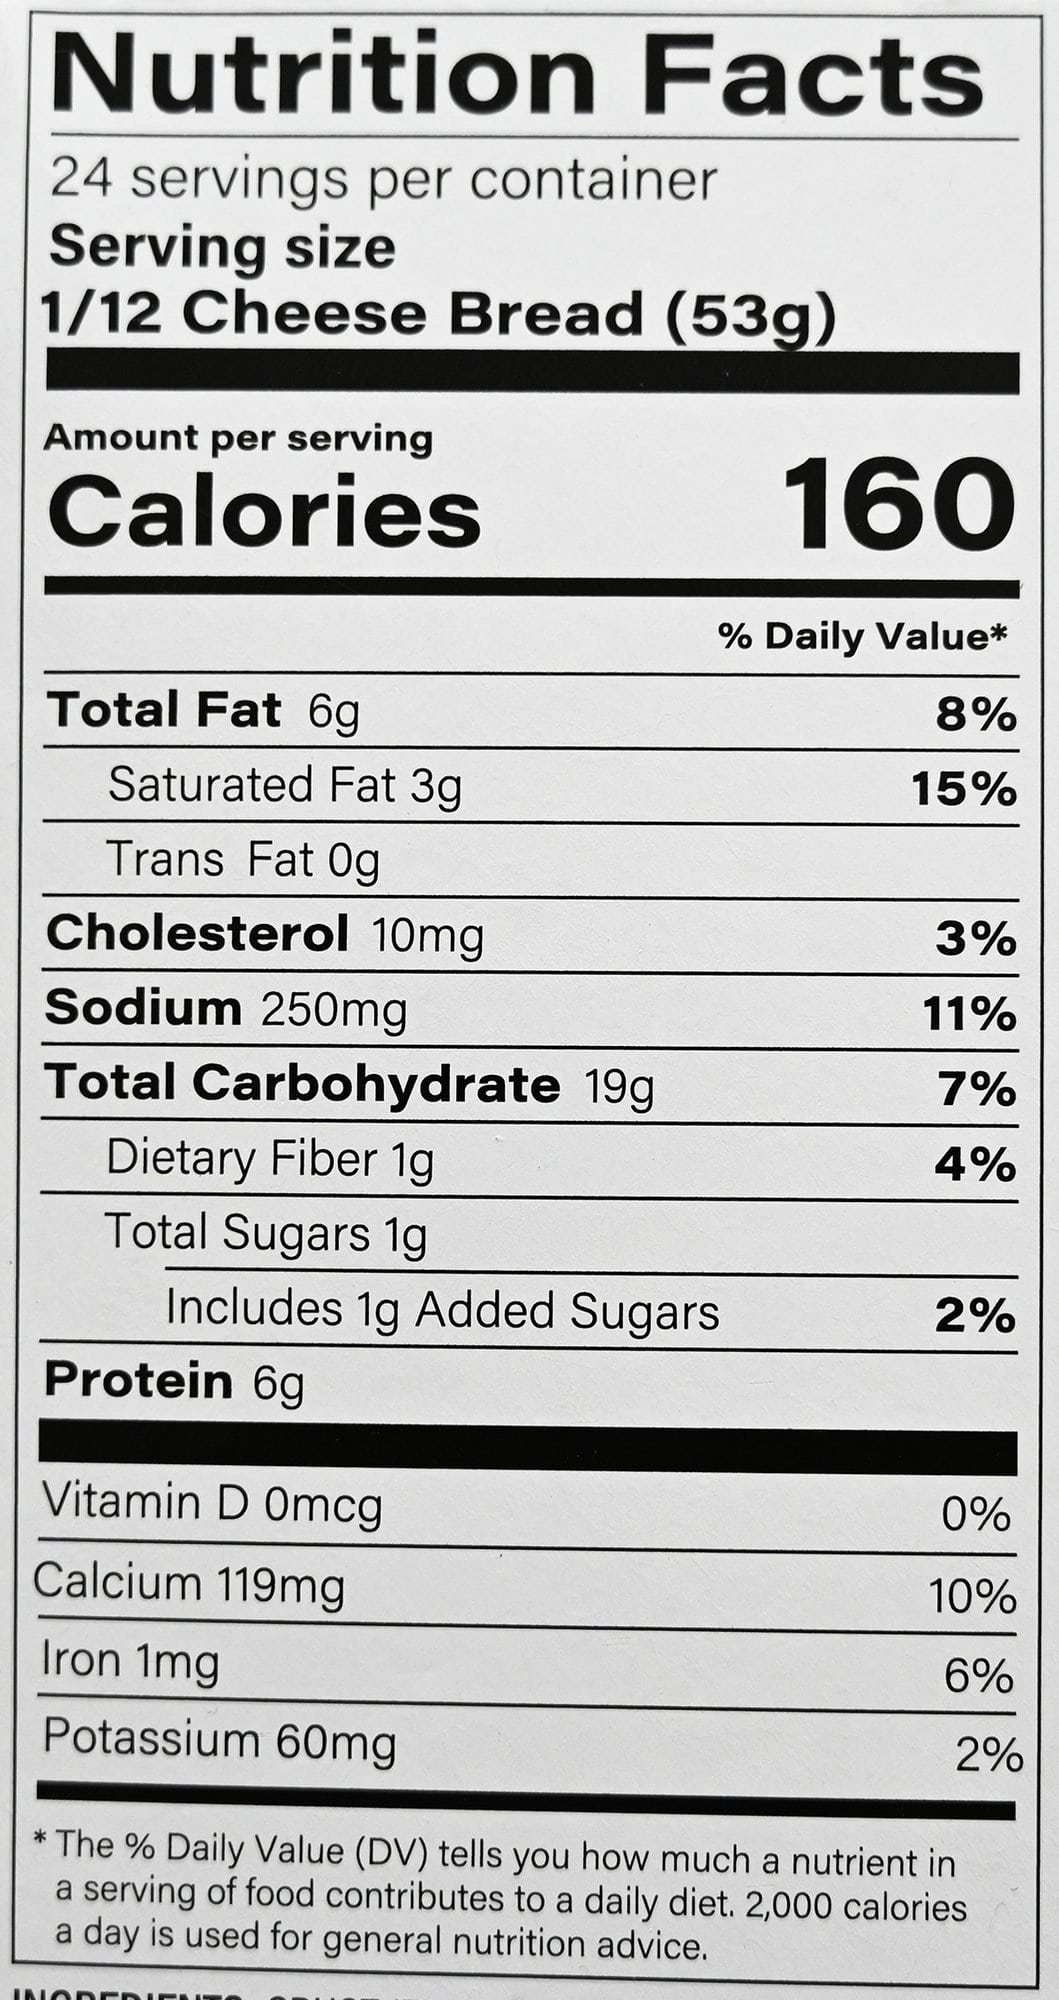 Image of the nutrition facrs for the cheese bread from the back of the box.